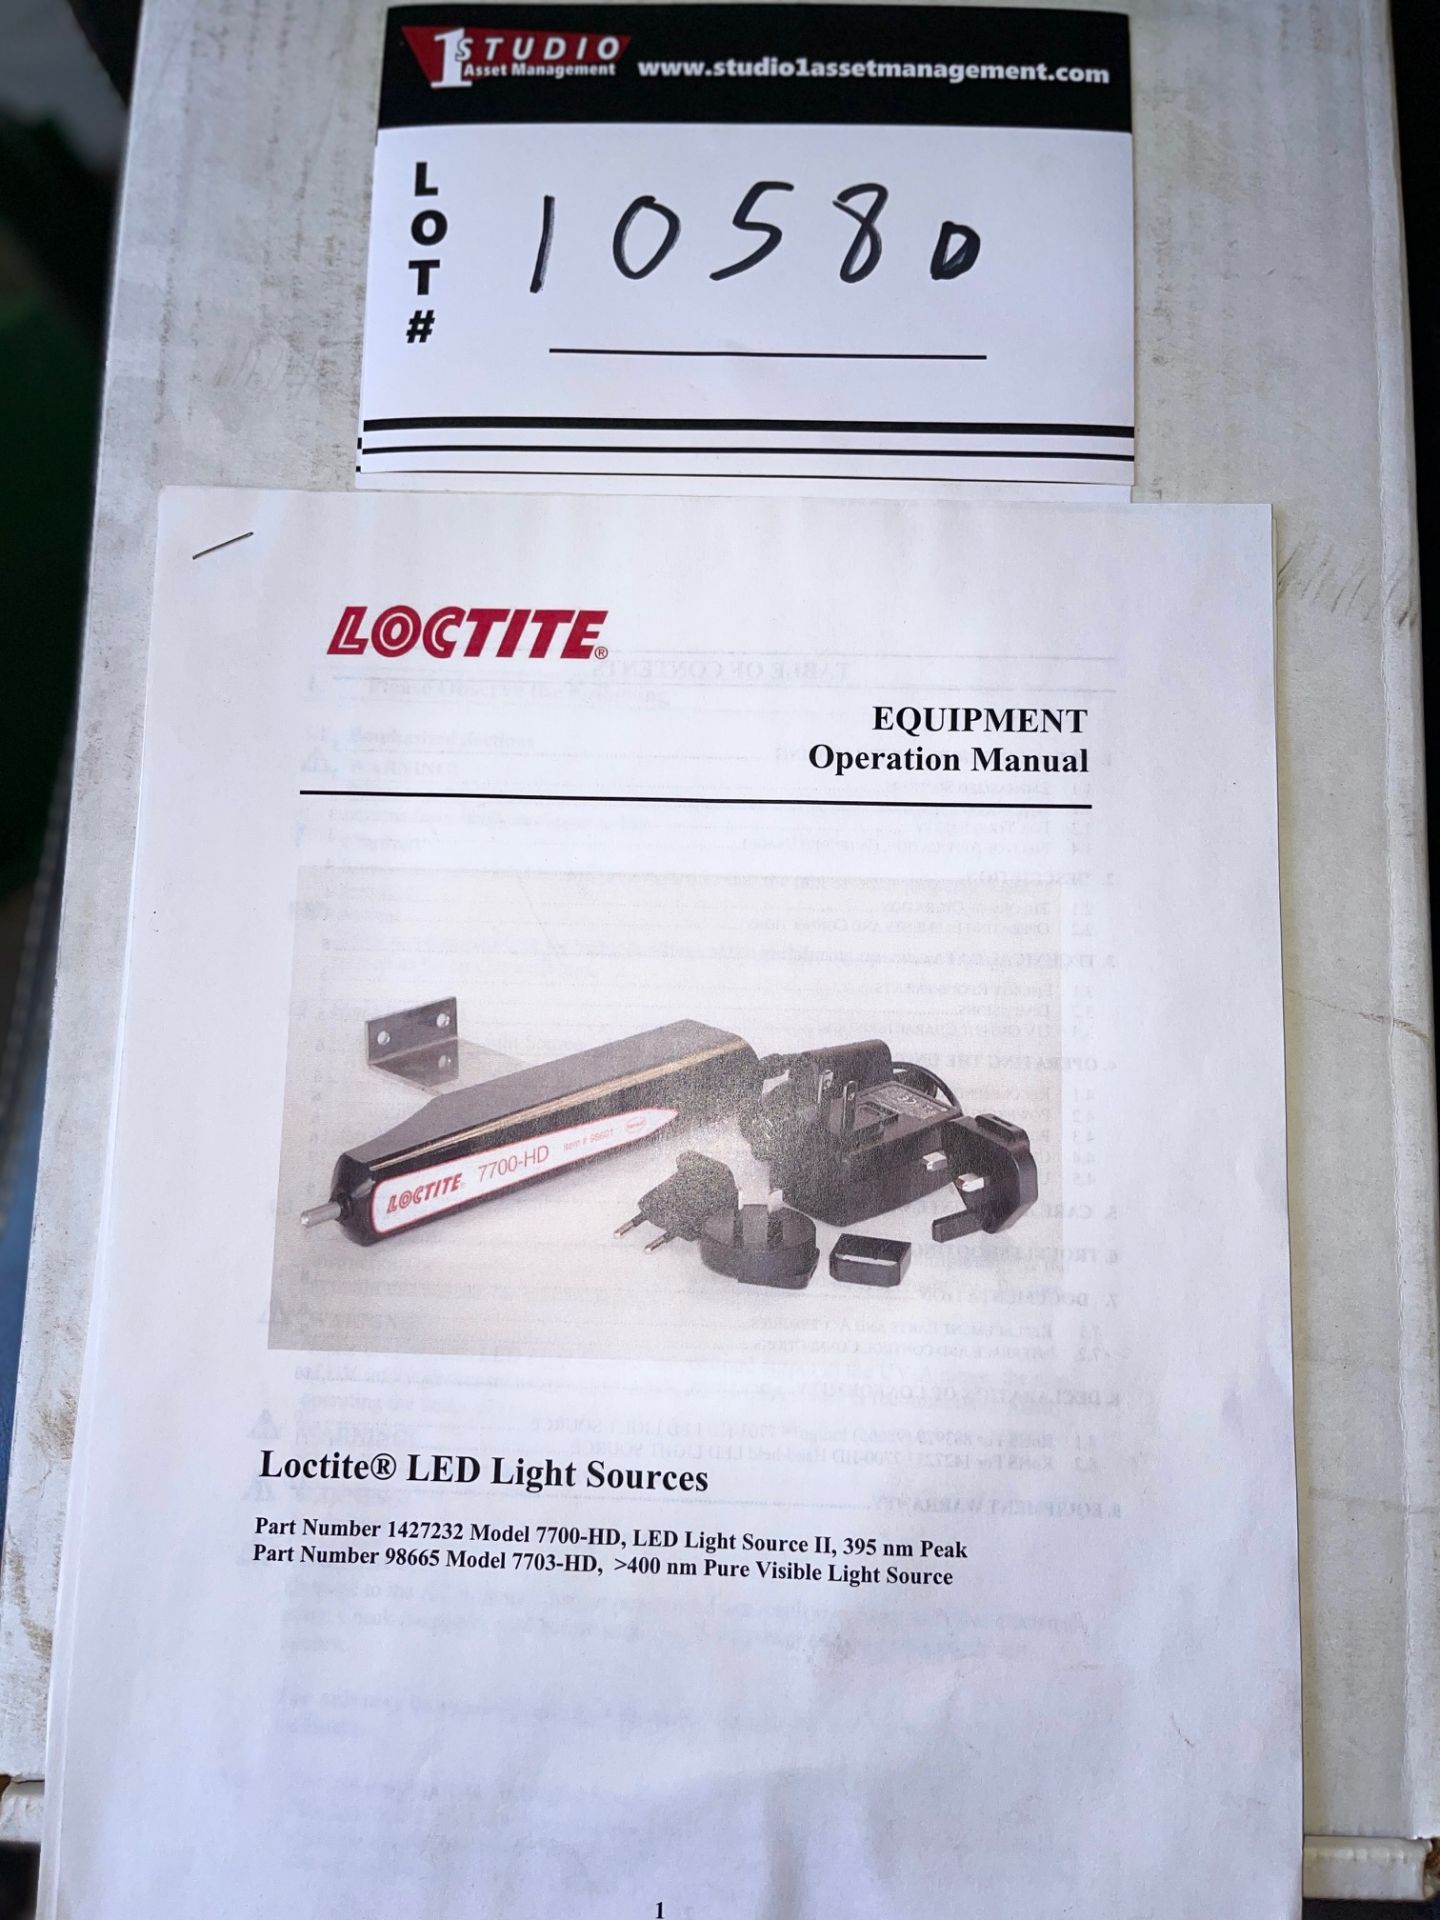 LOCTITE LED LIGHT SOURCES - Image 3 of 3